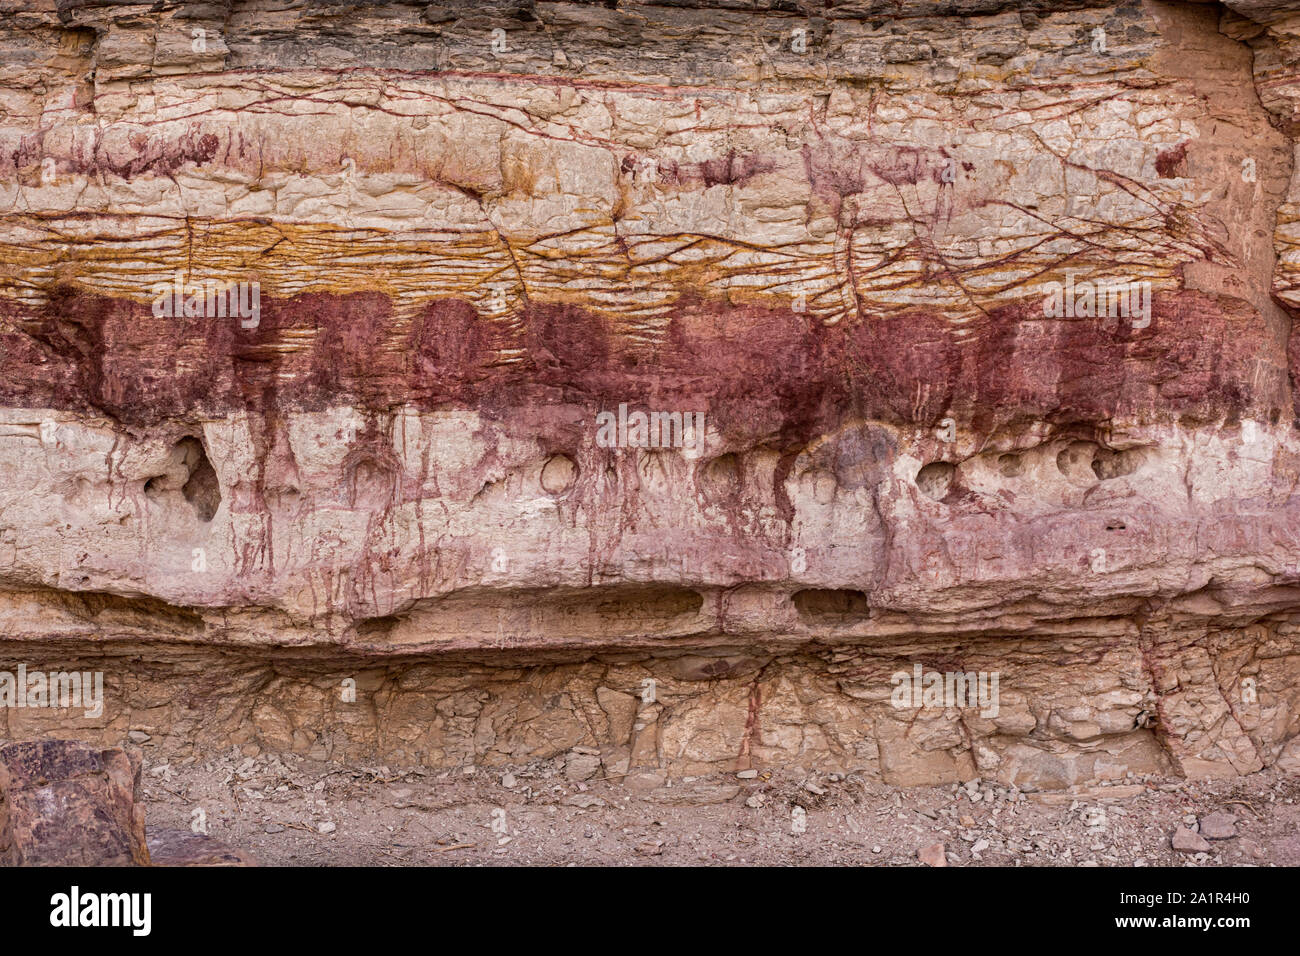 a cliff in the makhtesh ramon in israel showing different layers of rocks and soil including a red layer that bleeds into the layer below Stock Photo